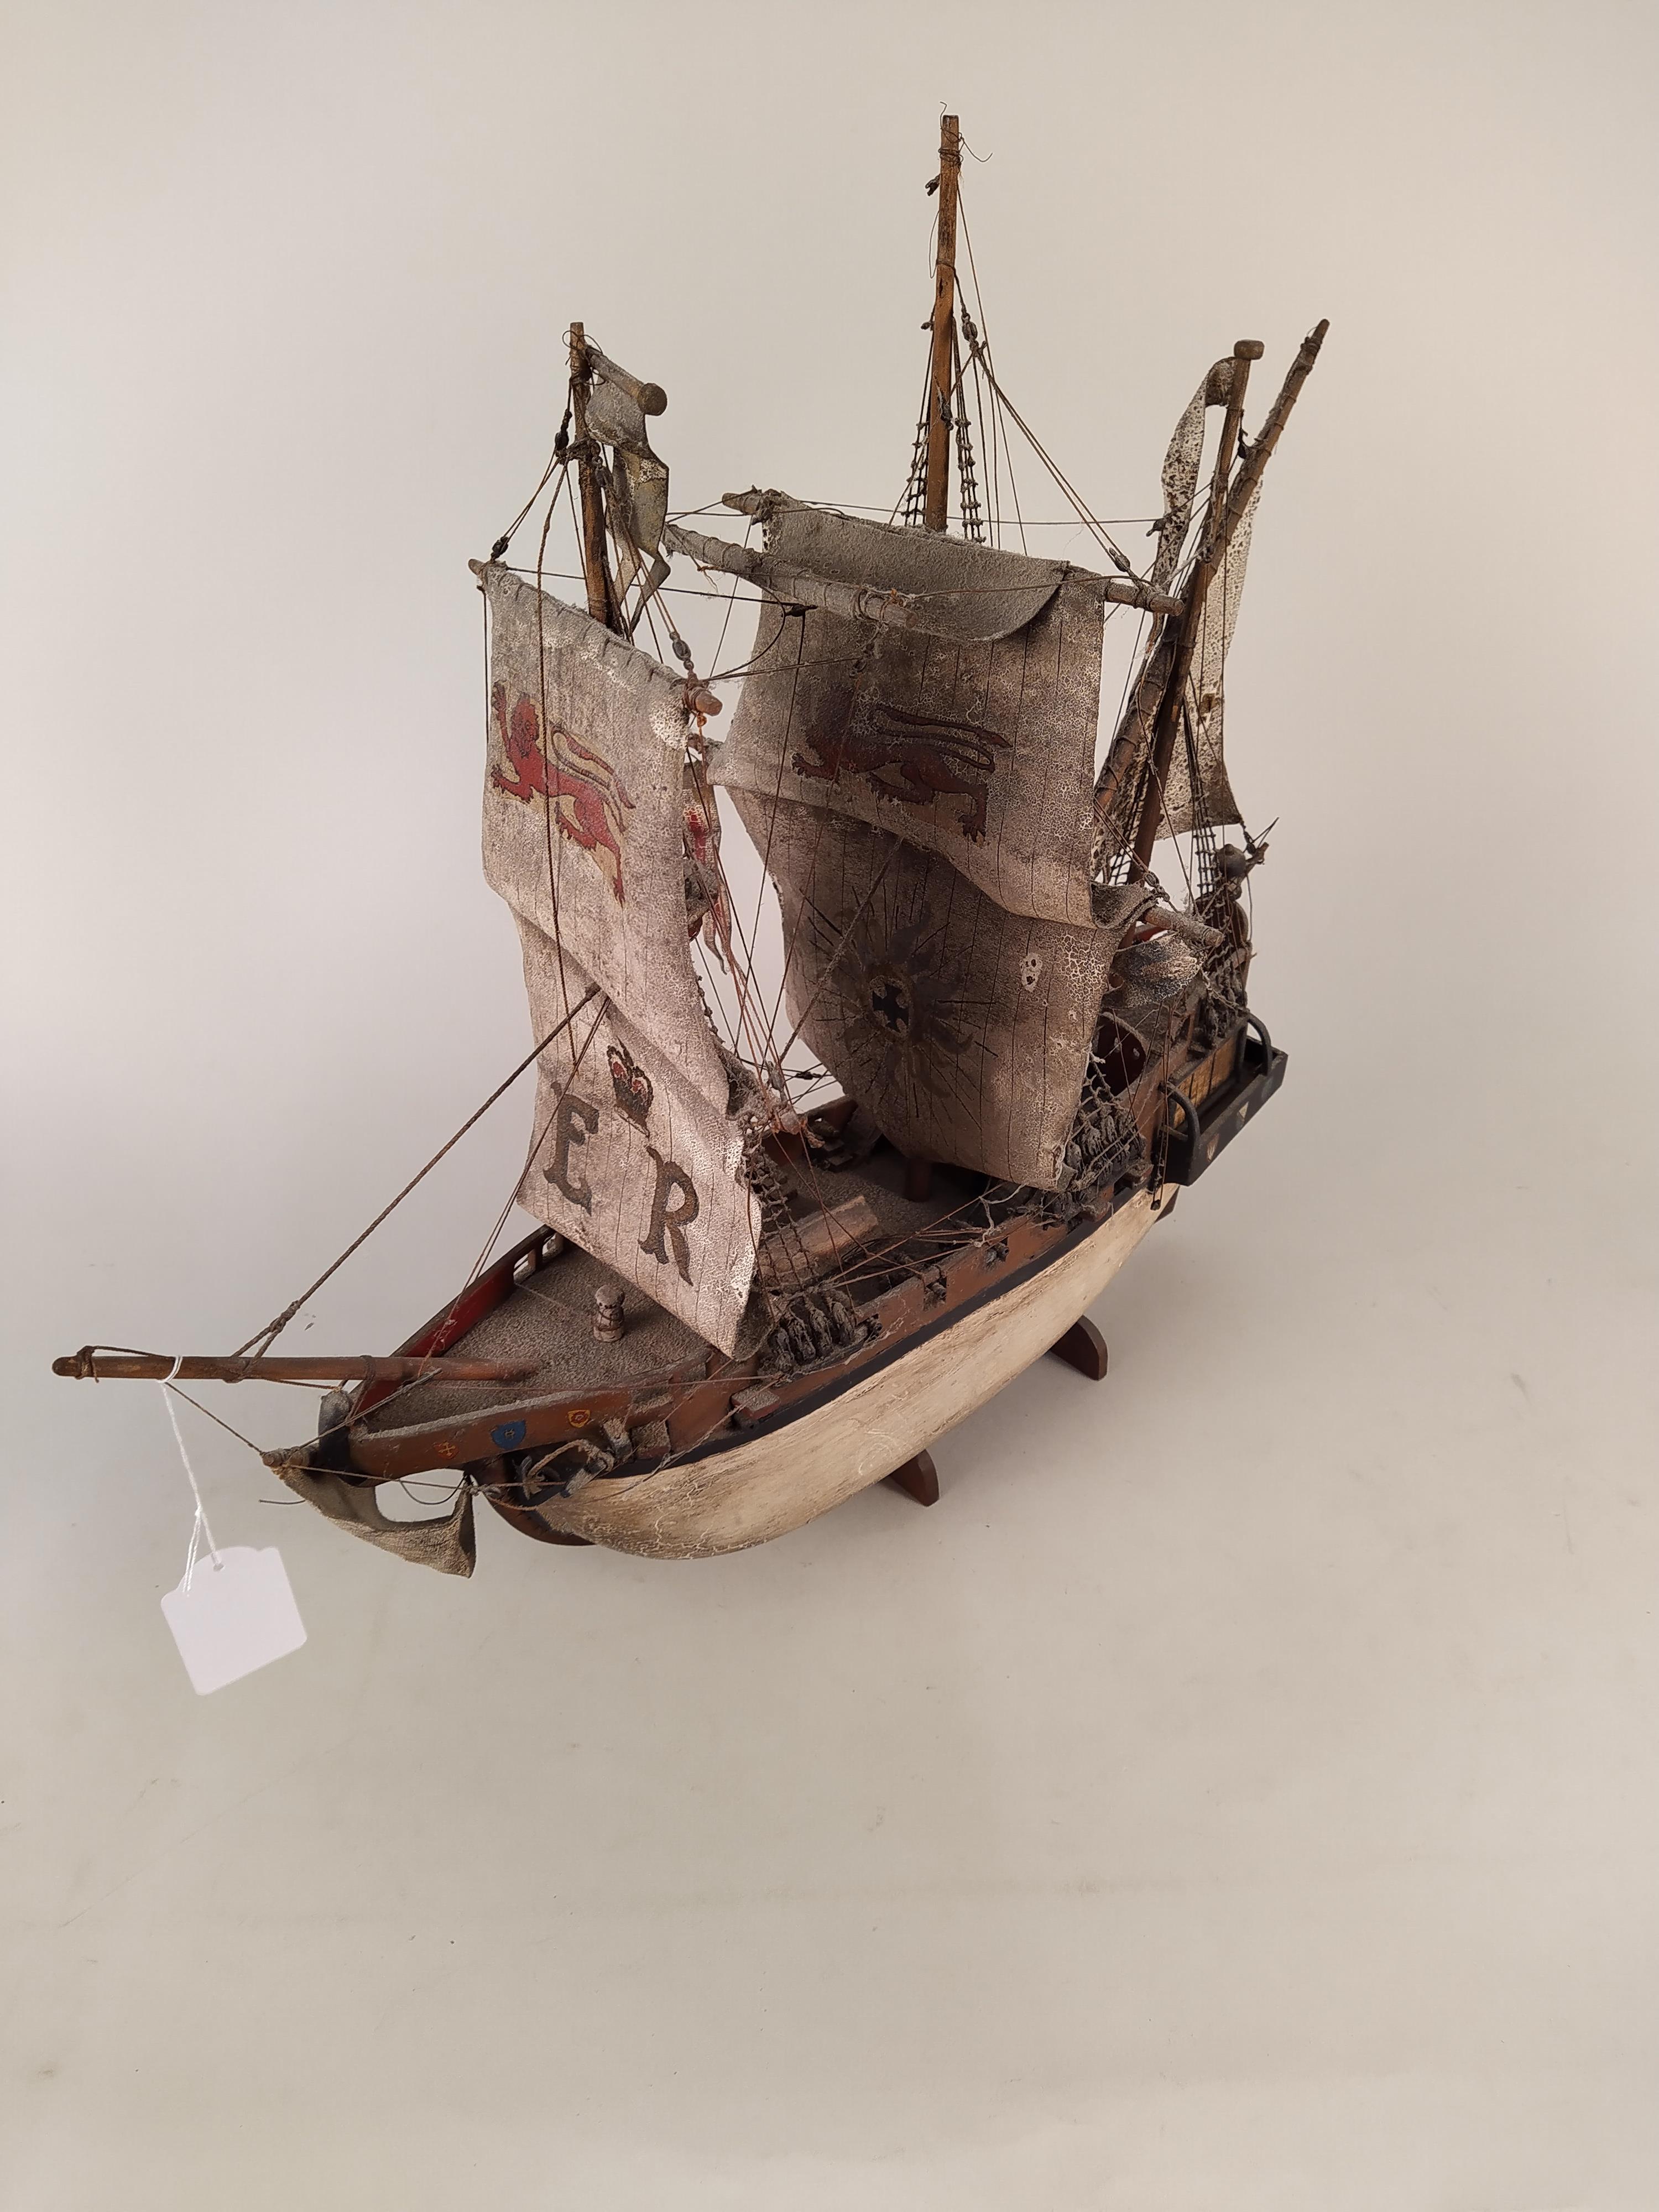 A model of a wooden hulled fully rigged Elizabethan galleon with painted sails - Image 2 of 3